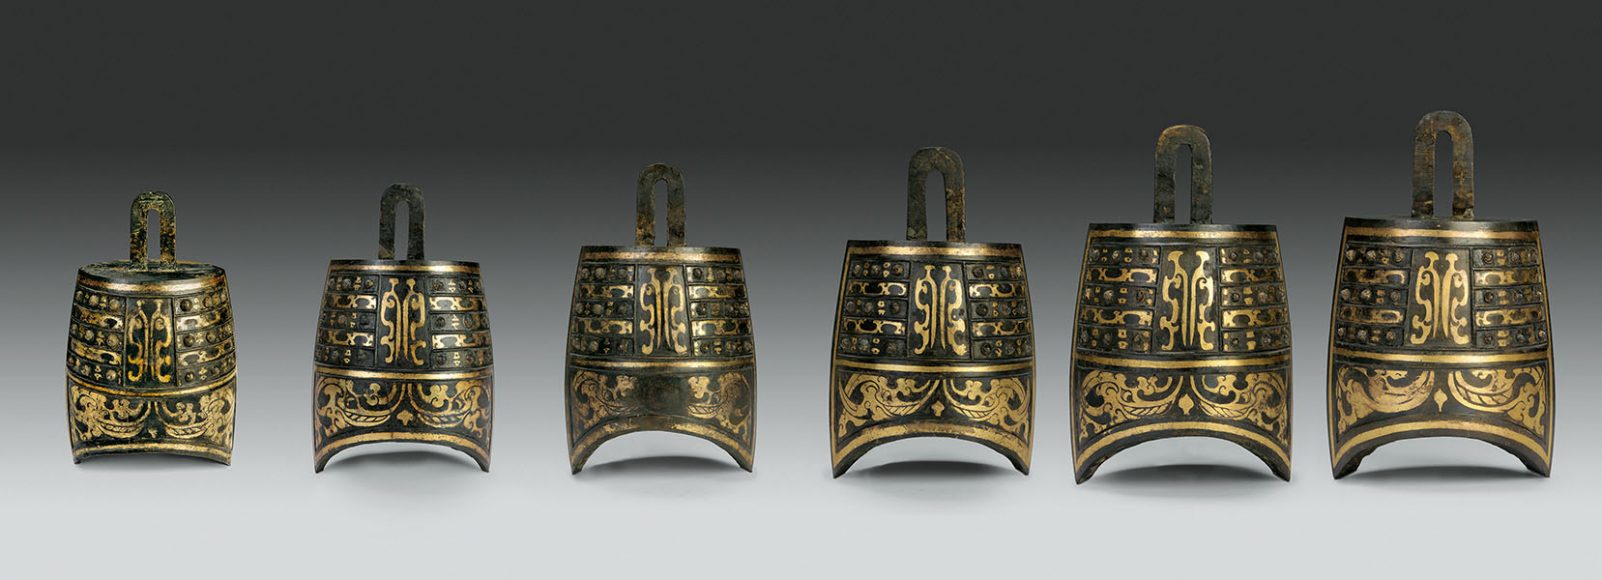 Six Niuzhong Balls from the Western Han dynasty (206 B.C.-A.D. 9), parcel-gilt bronze. Photograph courtesy Jiangxi Provincial Institute of Cultural Relics and Archaeology. 